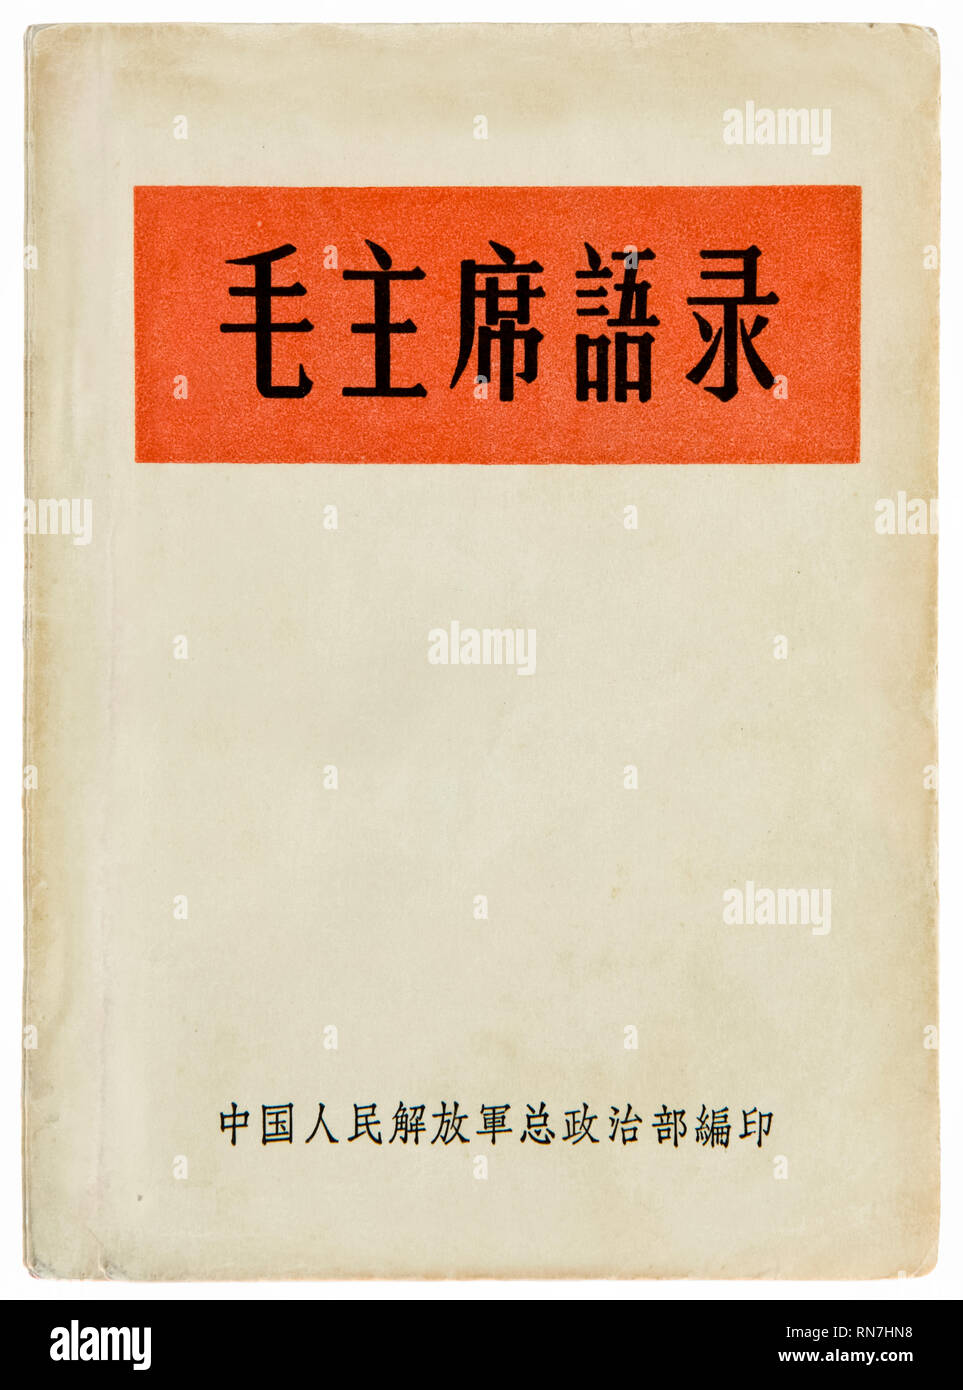 Front cover of ‘The Little Red Book’ (Quotations from Chairman Mao Tse-tung) containing statements made by Chairman Mao, Chinese communist revolutionary and founding father of the People's Republic of China first edition published in 1964. Stock Photo